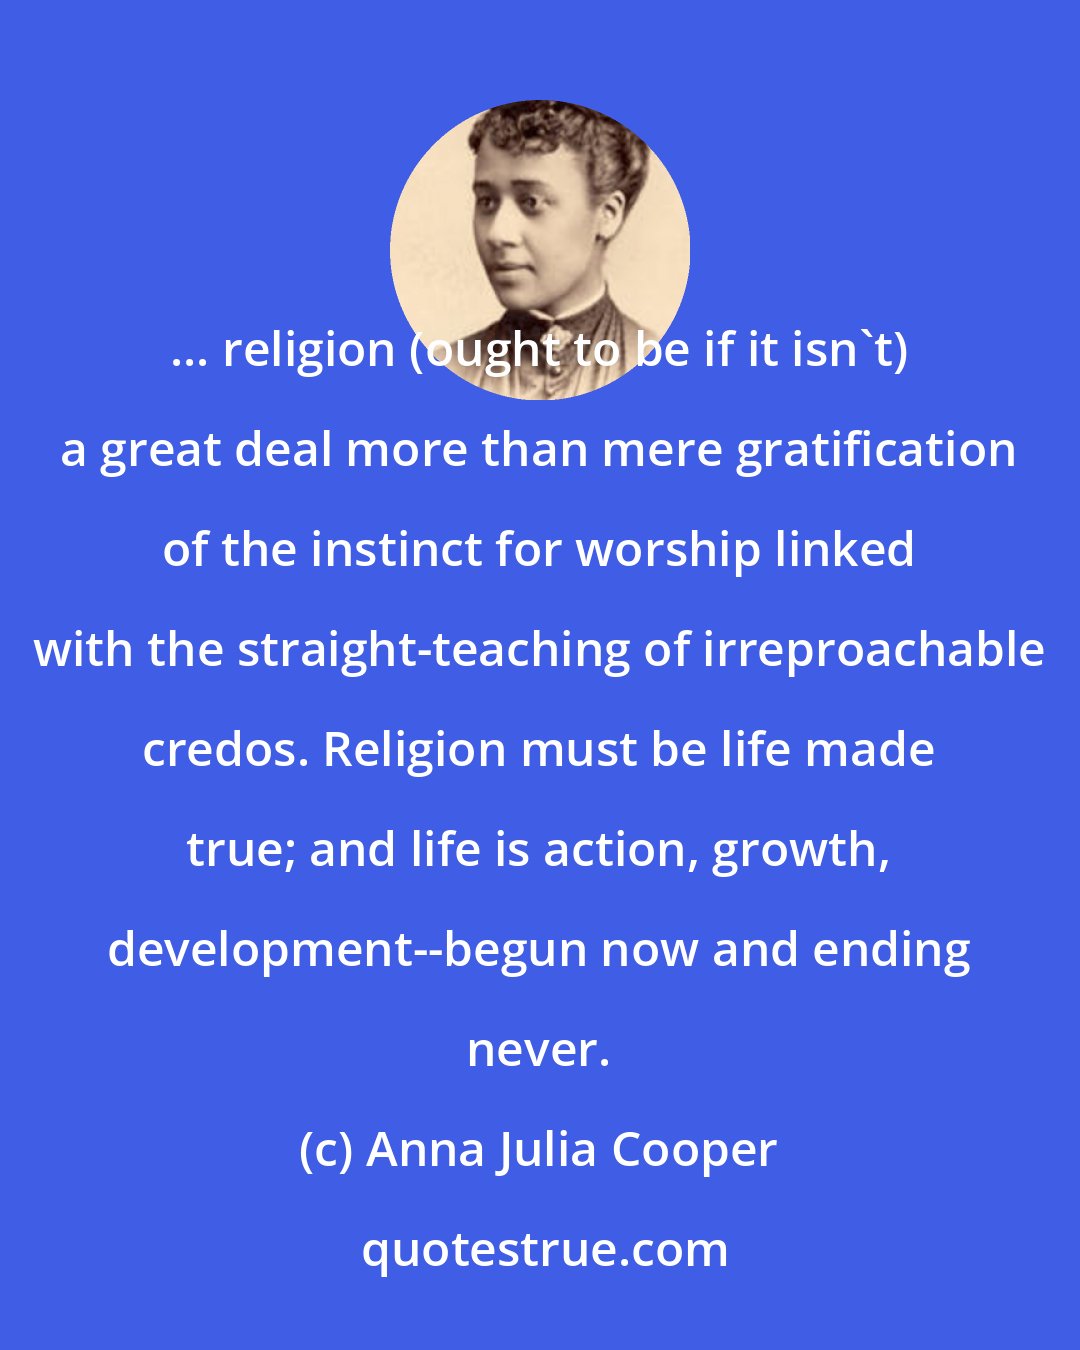 Anna Julia Cooper: ... religion (ought to be if it isn't) a great deal more than mere gratification of the instinct for worship linked with the straight-teaching of irreproachable credos. Religion must be life made true; and life is action, growth, development--begun now and ending never.